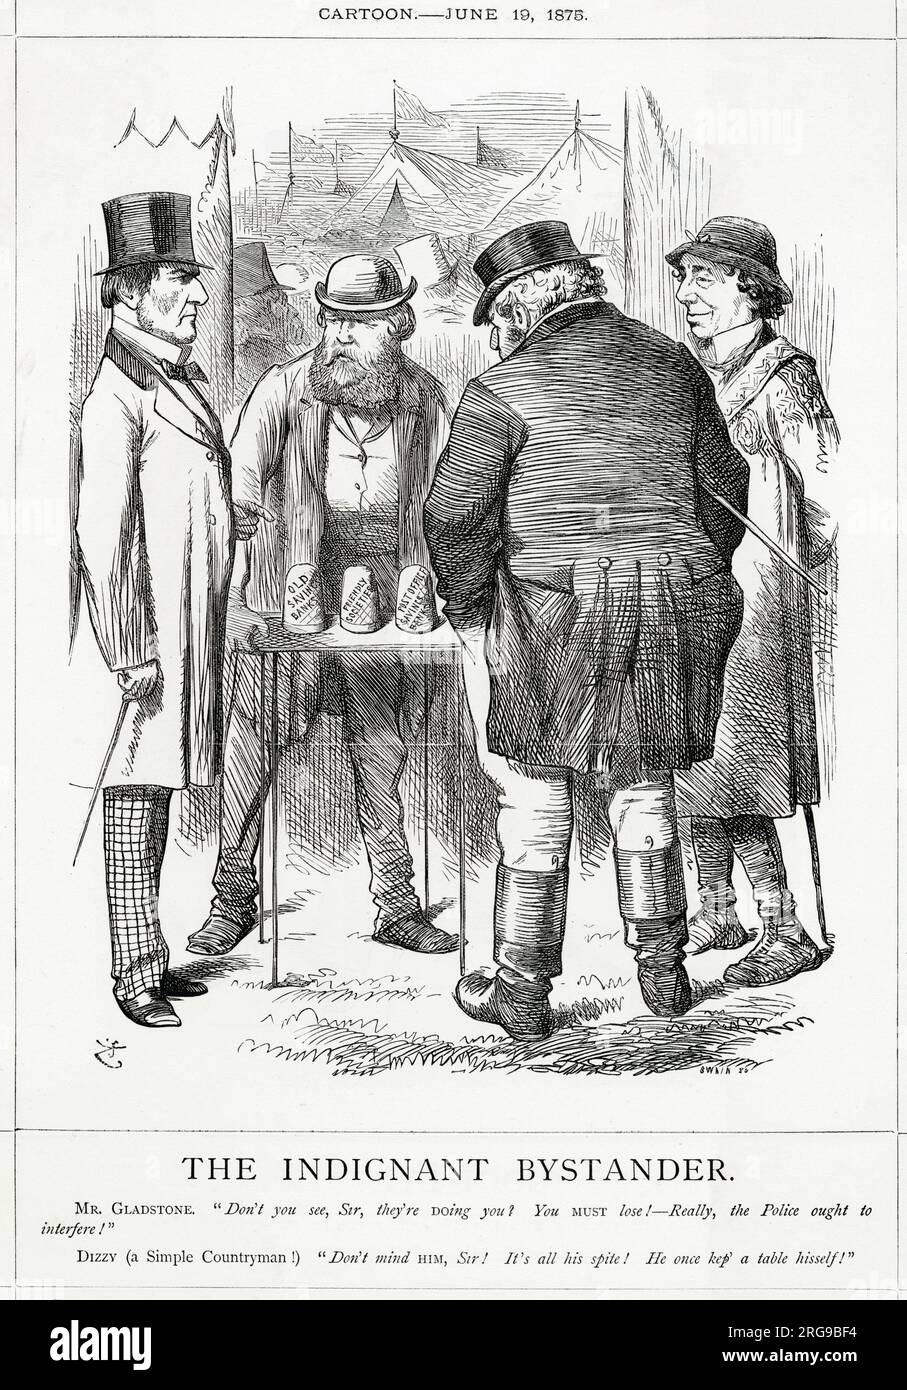 Cartoon, The Indignant Bystander -- in a fairground analogy, Gladstone criticises the Conservative government's Savings Banks Bill, which was later withdrawn. John Bull looks at three options on the table: Old Savings Banks, Friendly Societies and Post Office Savings Banks. Benjamin Disraeli as a Simple Countryman tells John Bull not to take any notice of Gladstone -- he used to do similar work himself, and he's only criticising out of spite. Stock Photo